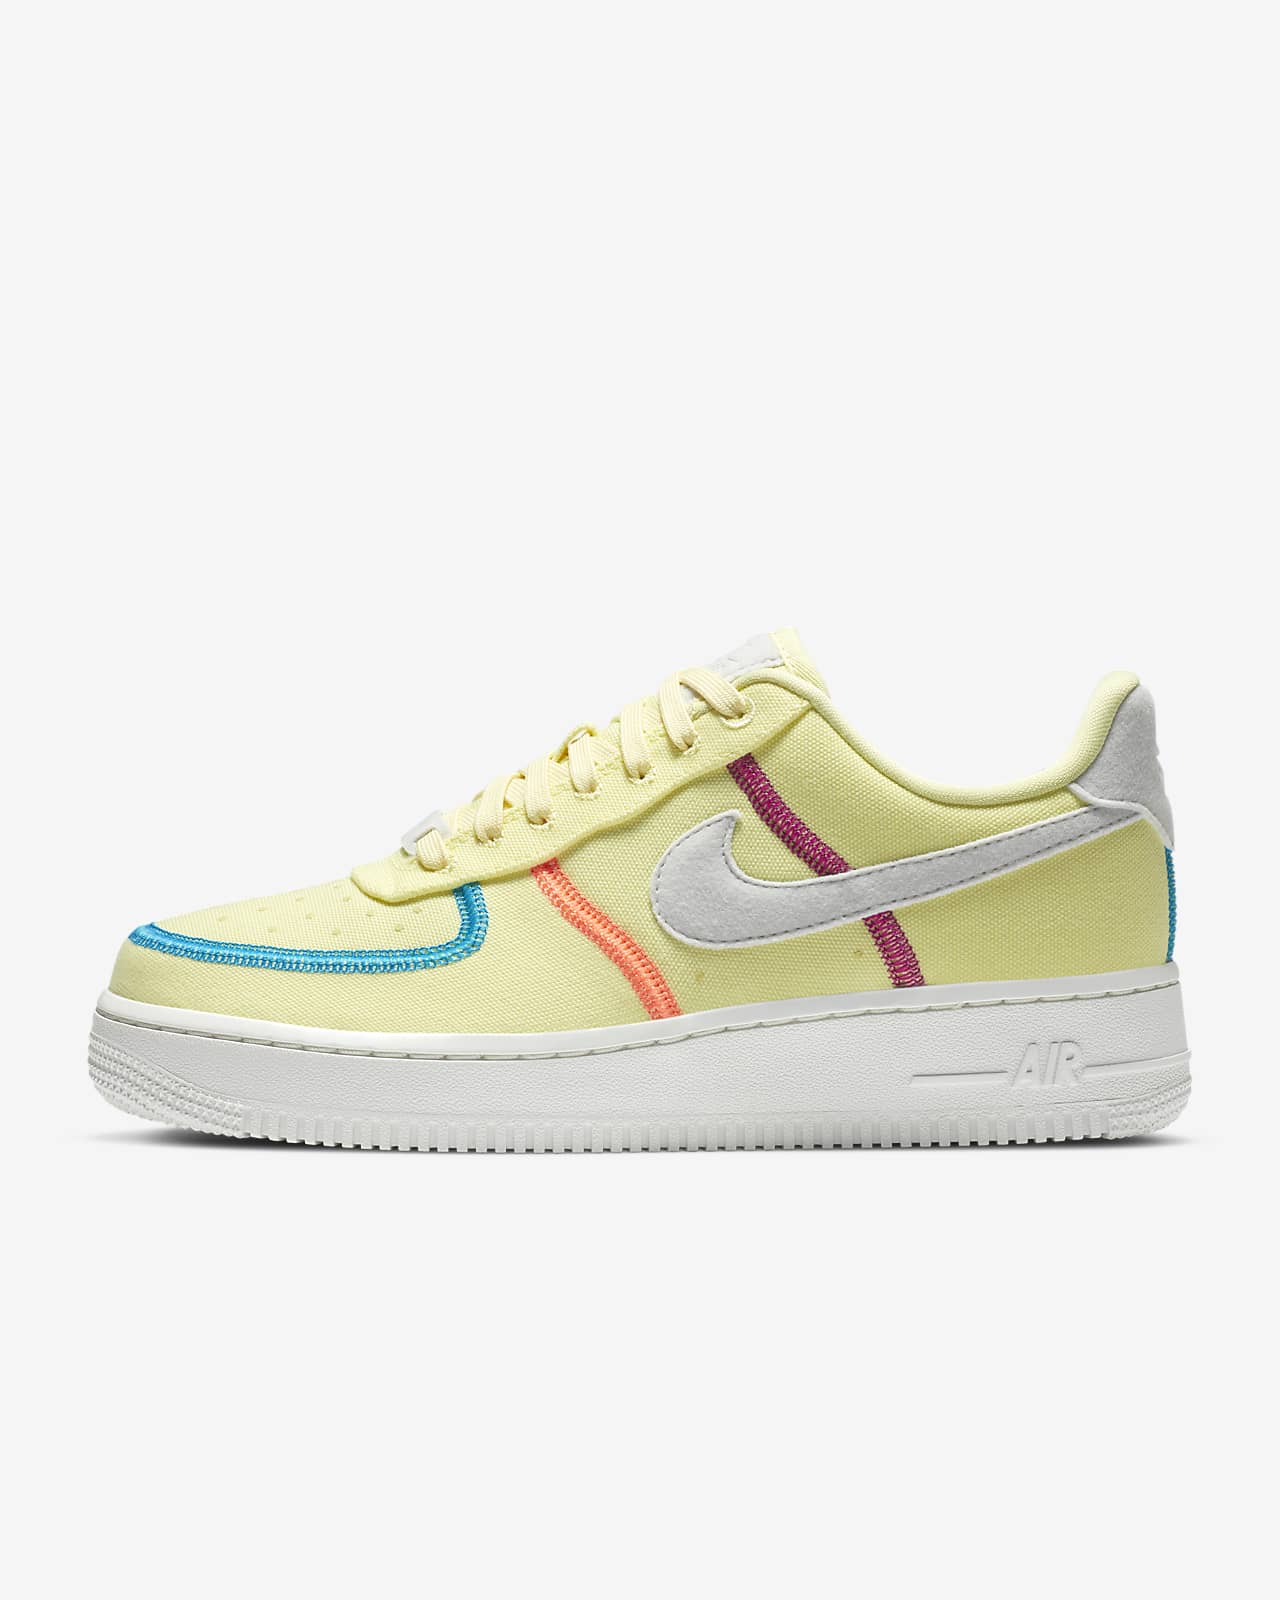 nike air force 1 womens size 5.5